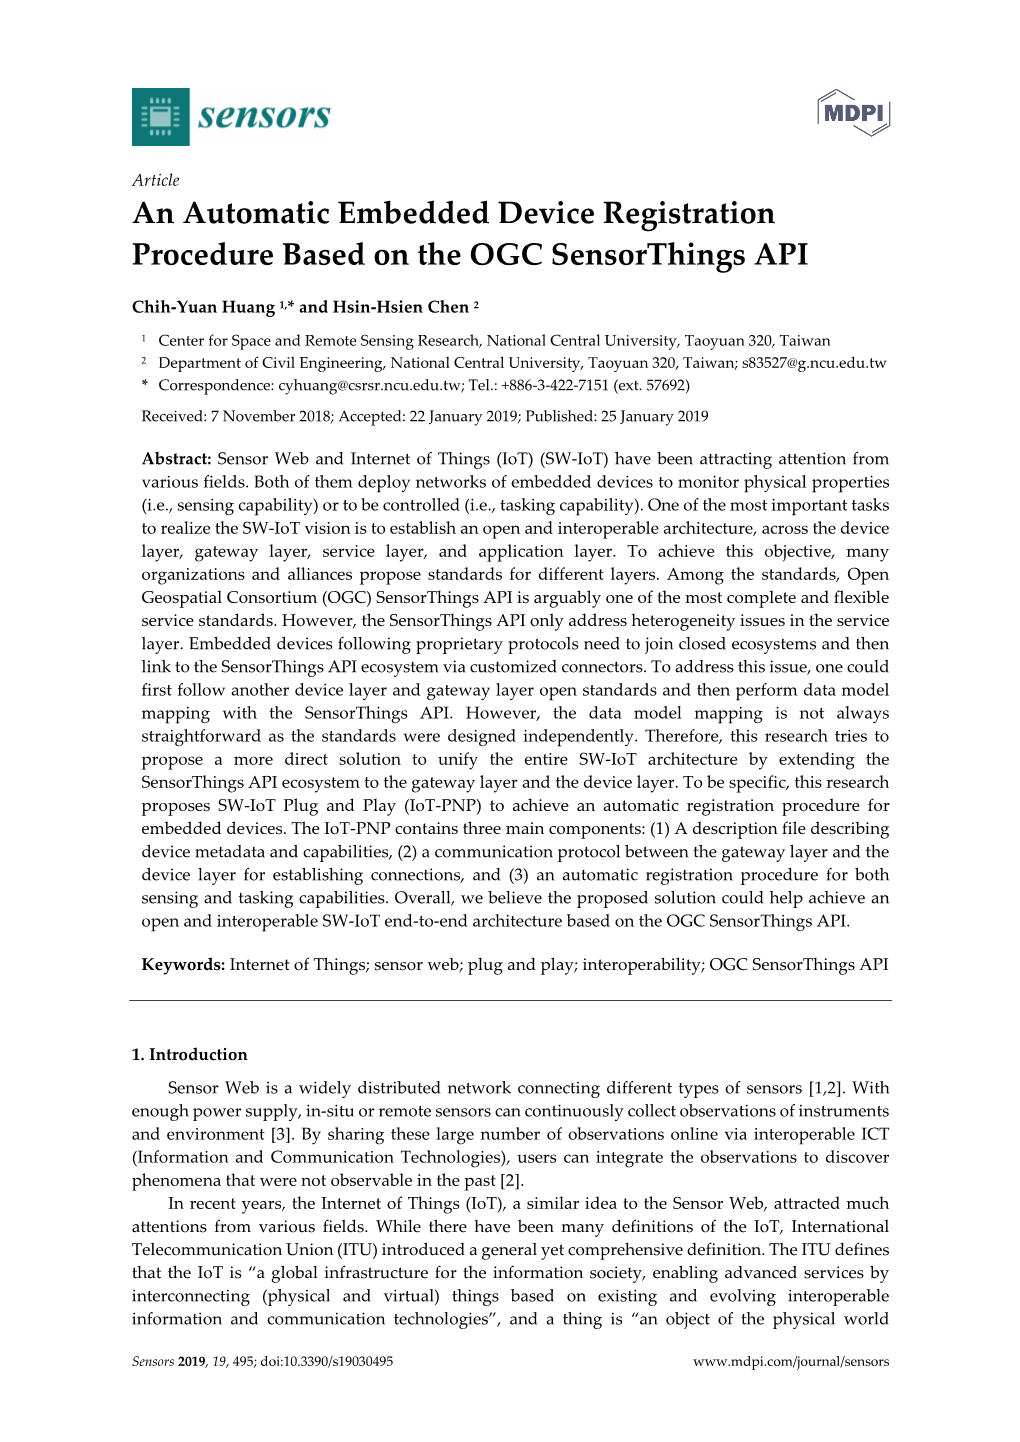 An Automatic Embedded Device Registration Procedure Based on the OGC Sensorthings API